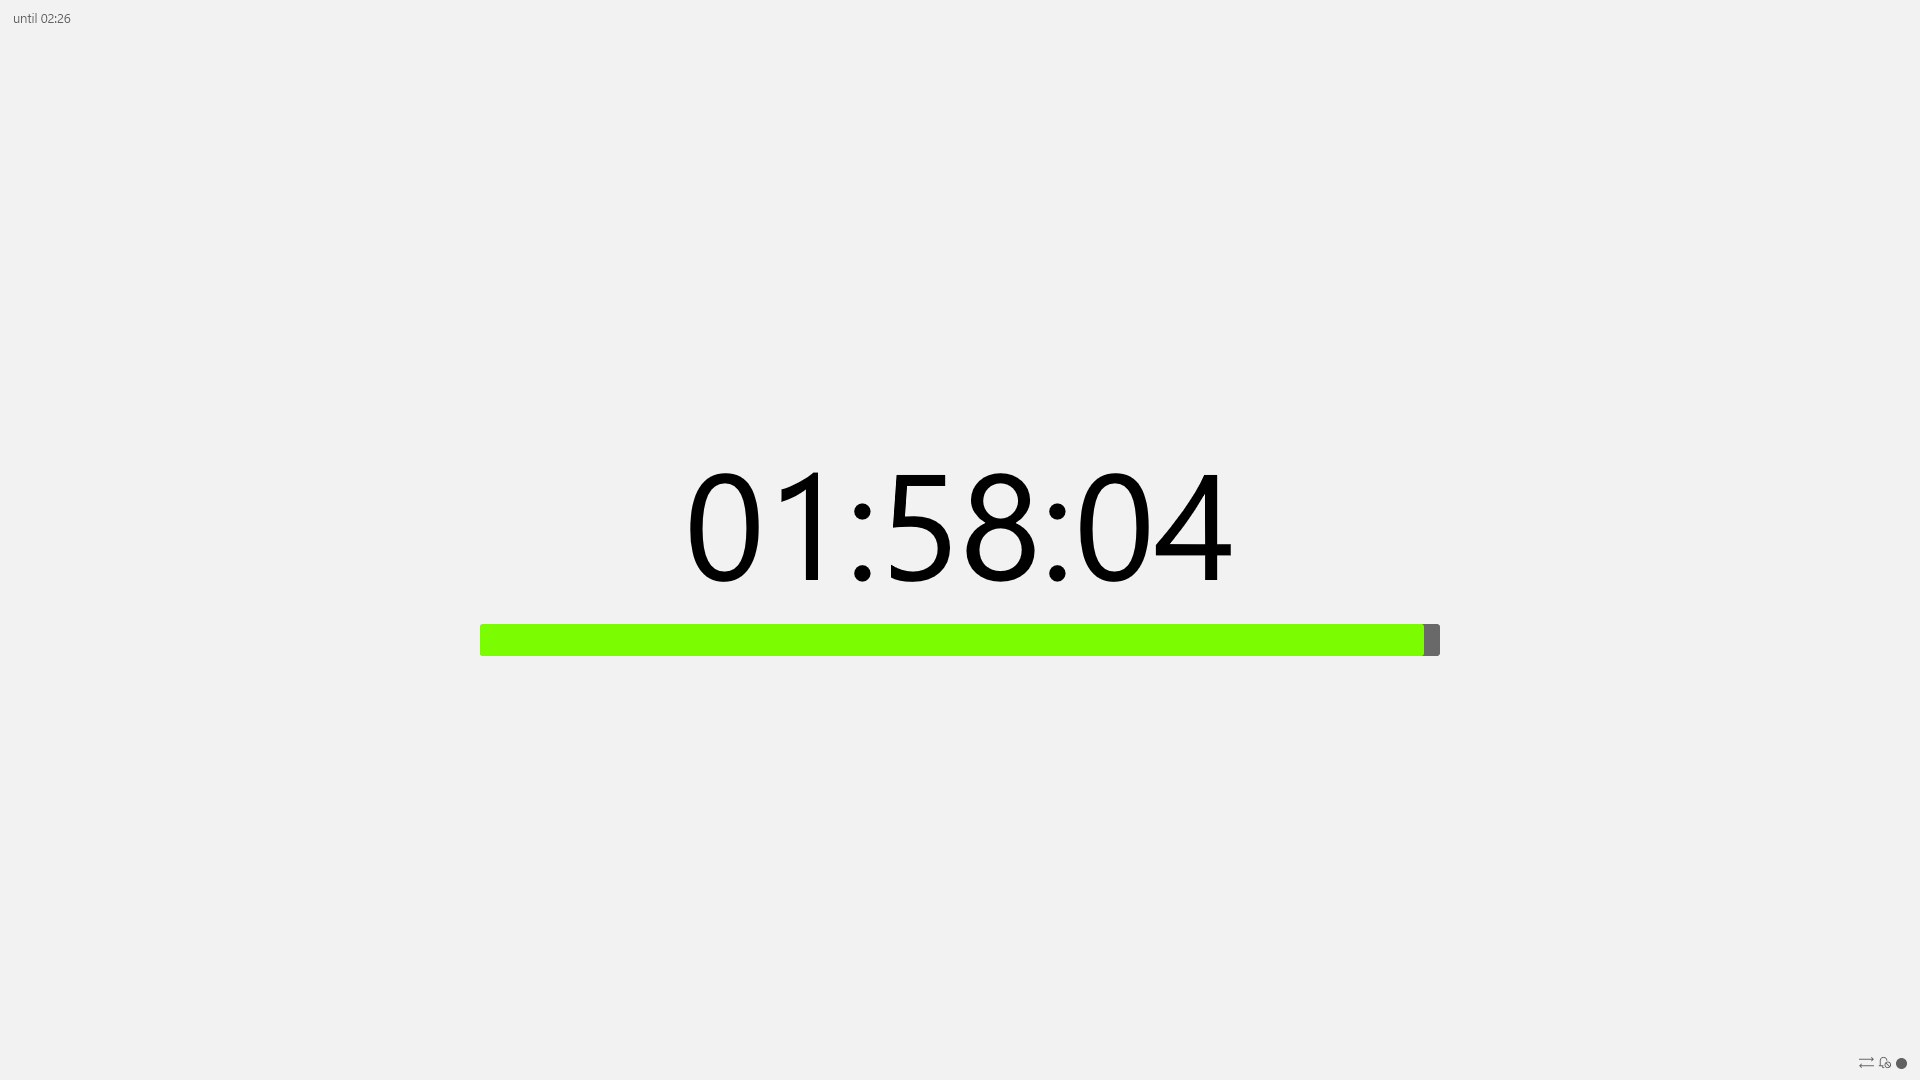 The Simple Timer